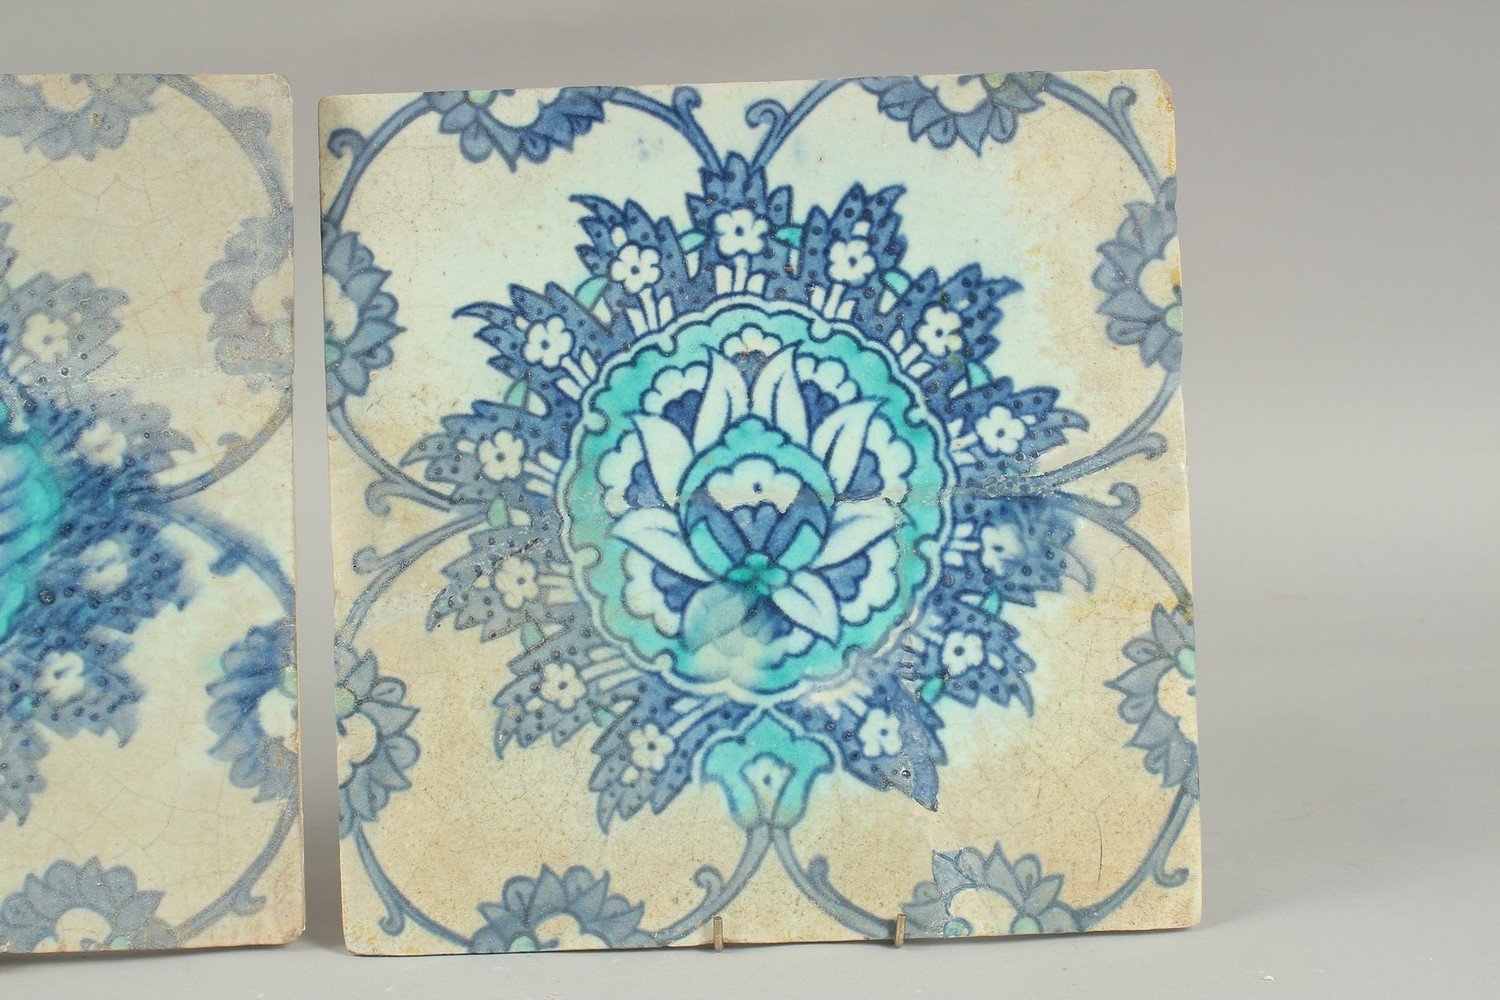 TWO EARLY 17TH CENTURY OTTOMAN IZNIK TILES, depicting a large lotus flower, (2). - Image 3 of 6